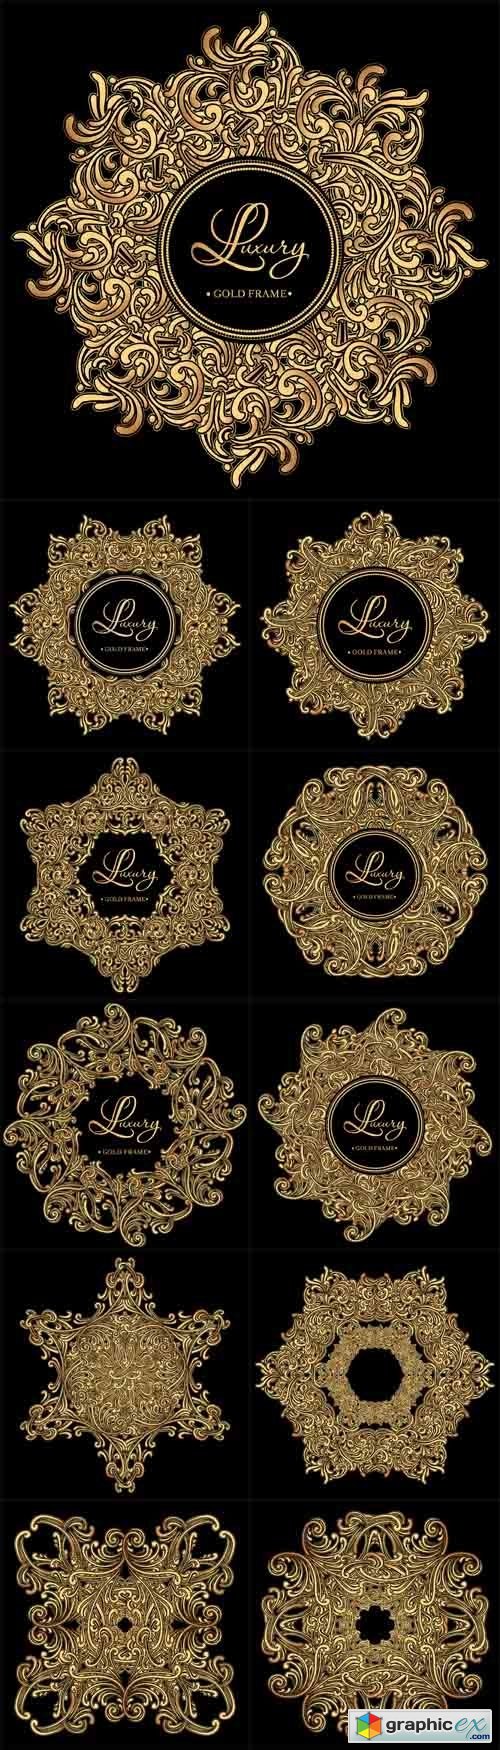 Luxury golden vintage frame with curls and vignettes in the style of Baroque